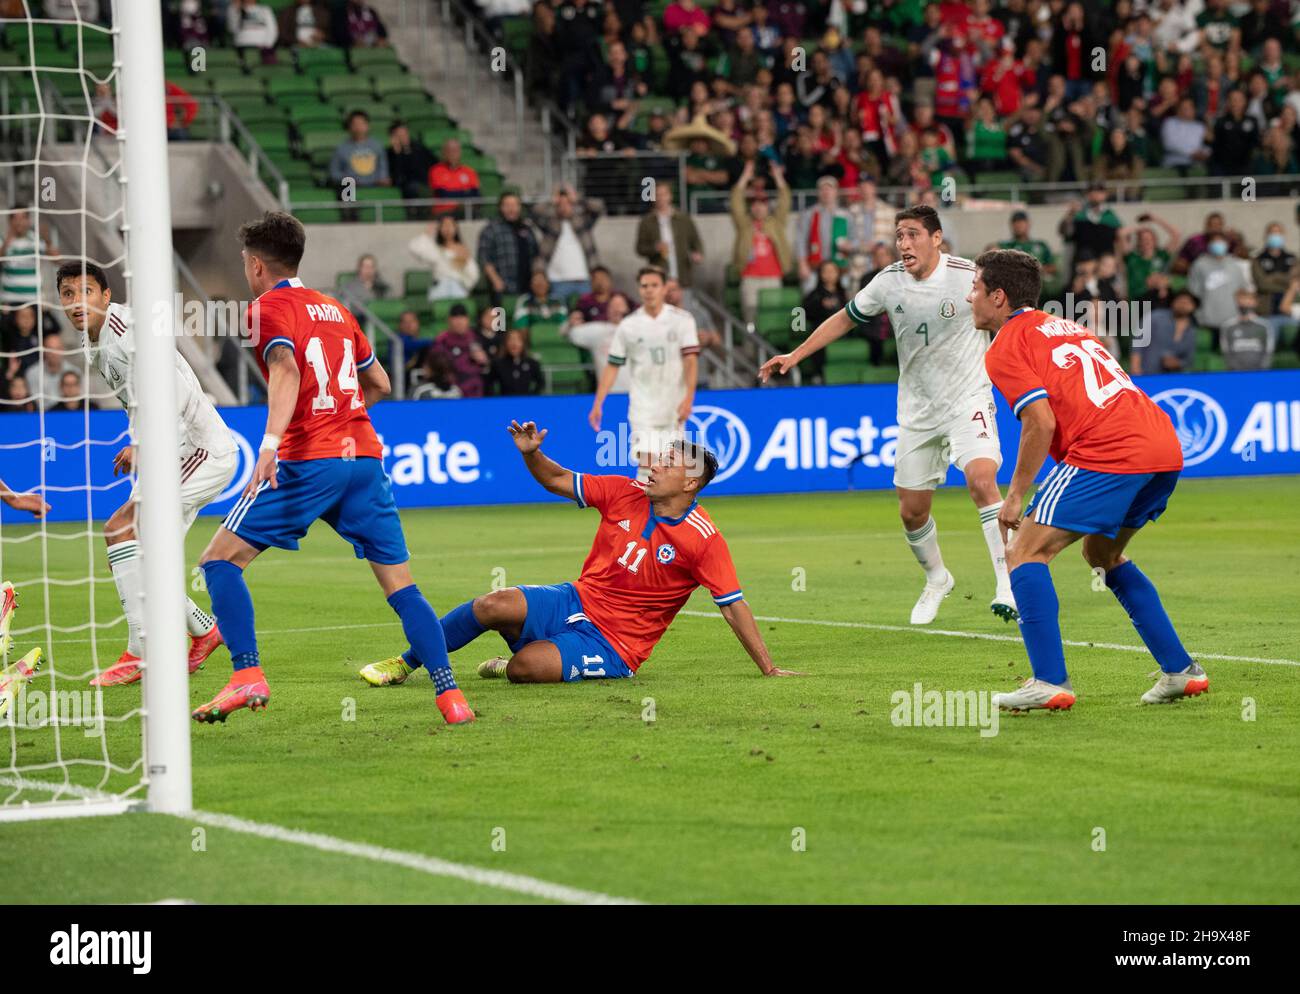 Austin, Texas, USA. 8th December, 2021. Chile's IVAN MORALES reacts as he scores a goal in the first half of a Mexico National Team vs. Chile friendly at Austin's Q2 Stadium. The teams were tied, 2-2 after regulation play. Mexico's #4 LUIS SALCEDO watches the action with Chile's #28 CLEMENTE MONTES. Credit: Bob Daemmrich/Alamy Live News Stock Photo